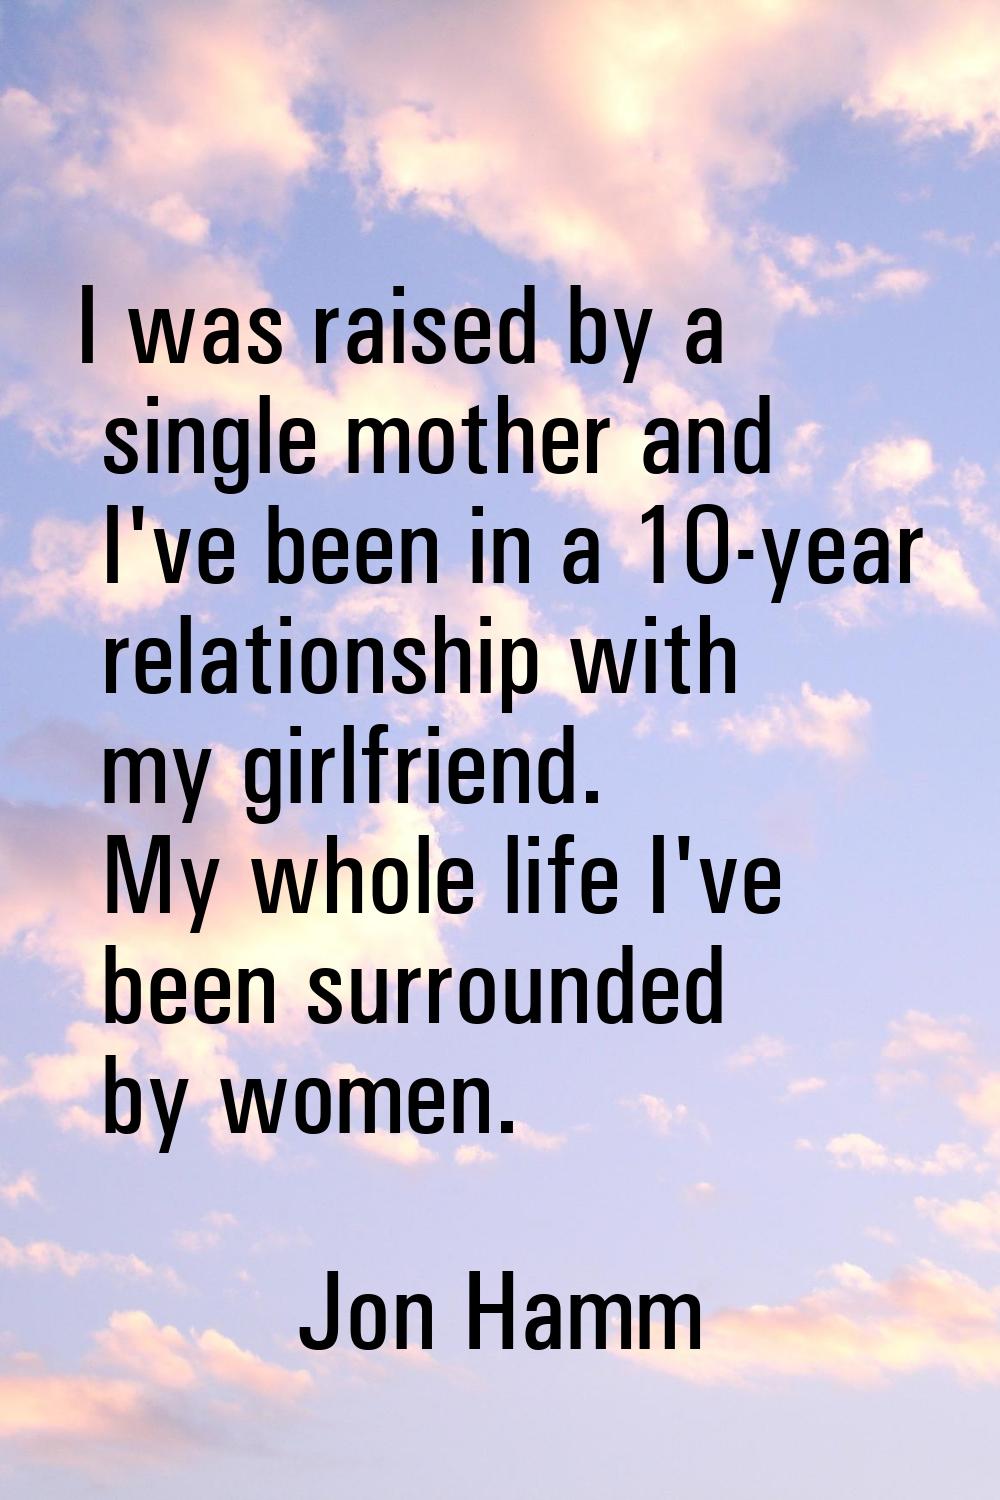 I was raised by a single mother and I've been in a 10-year relationship with my girlfriend. My whol